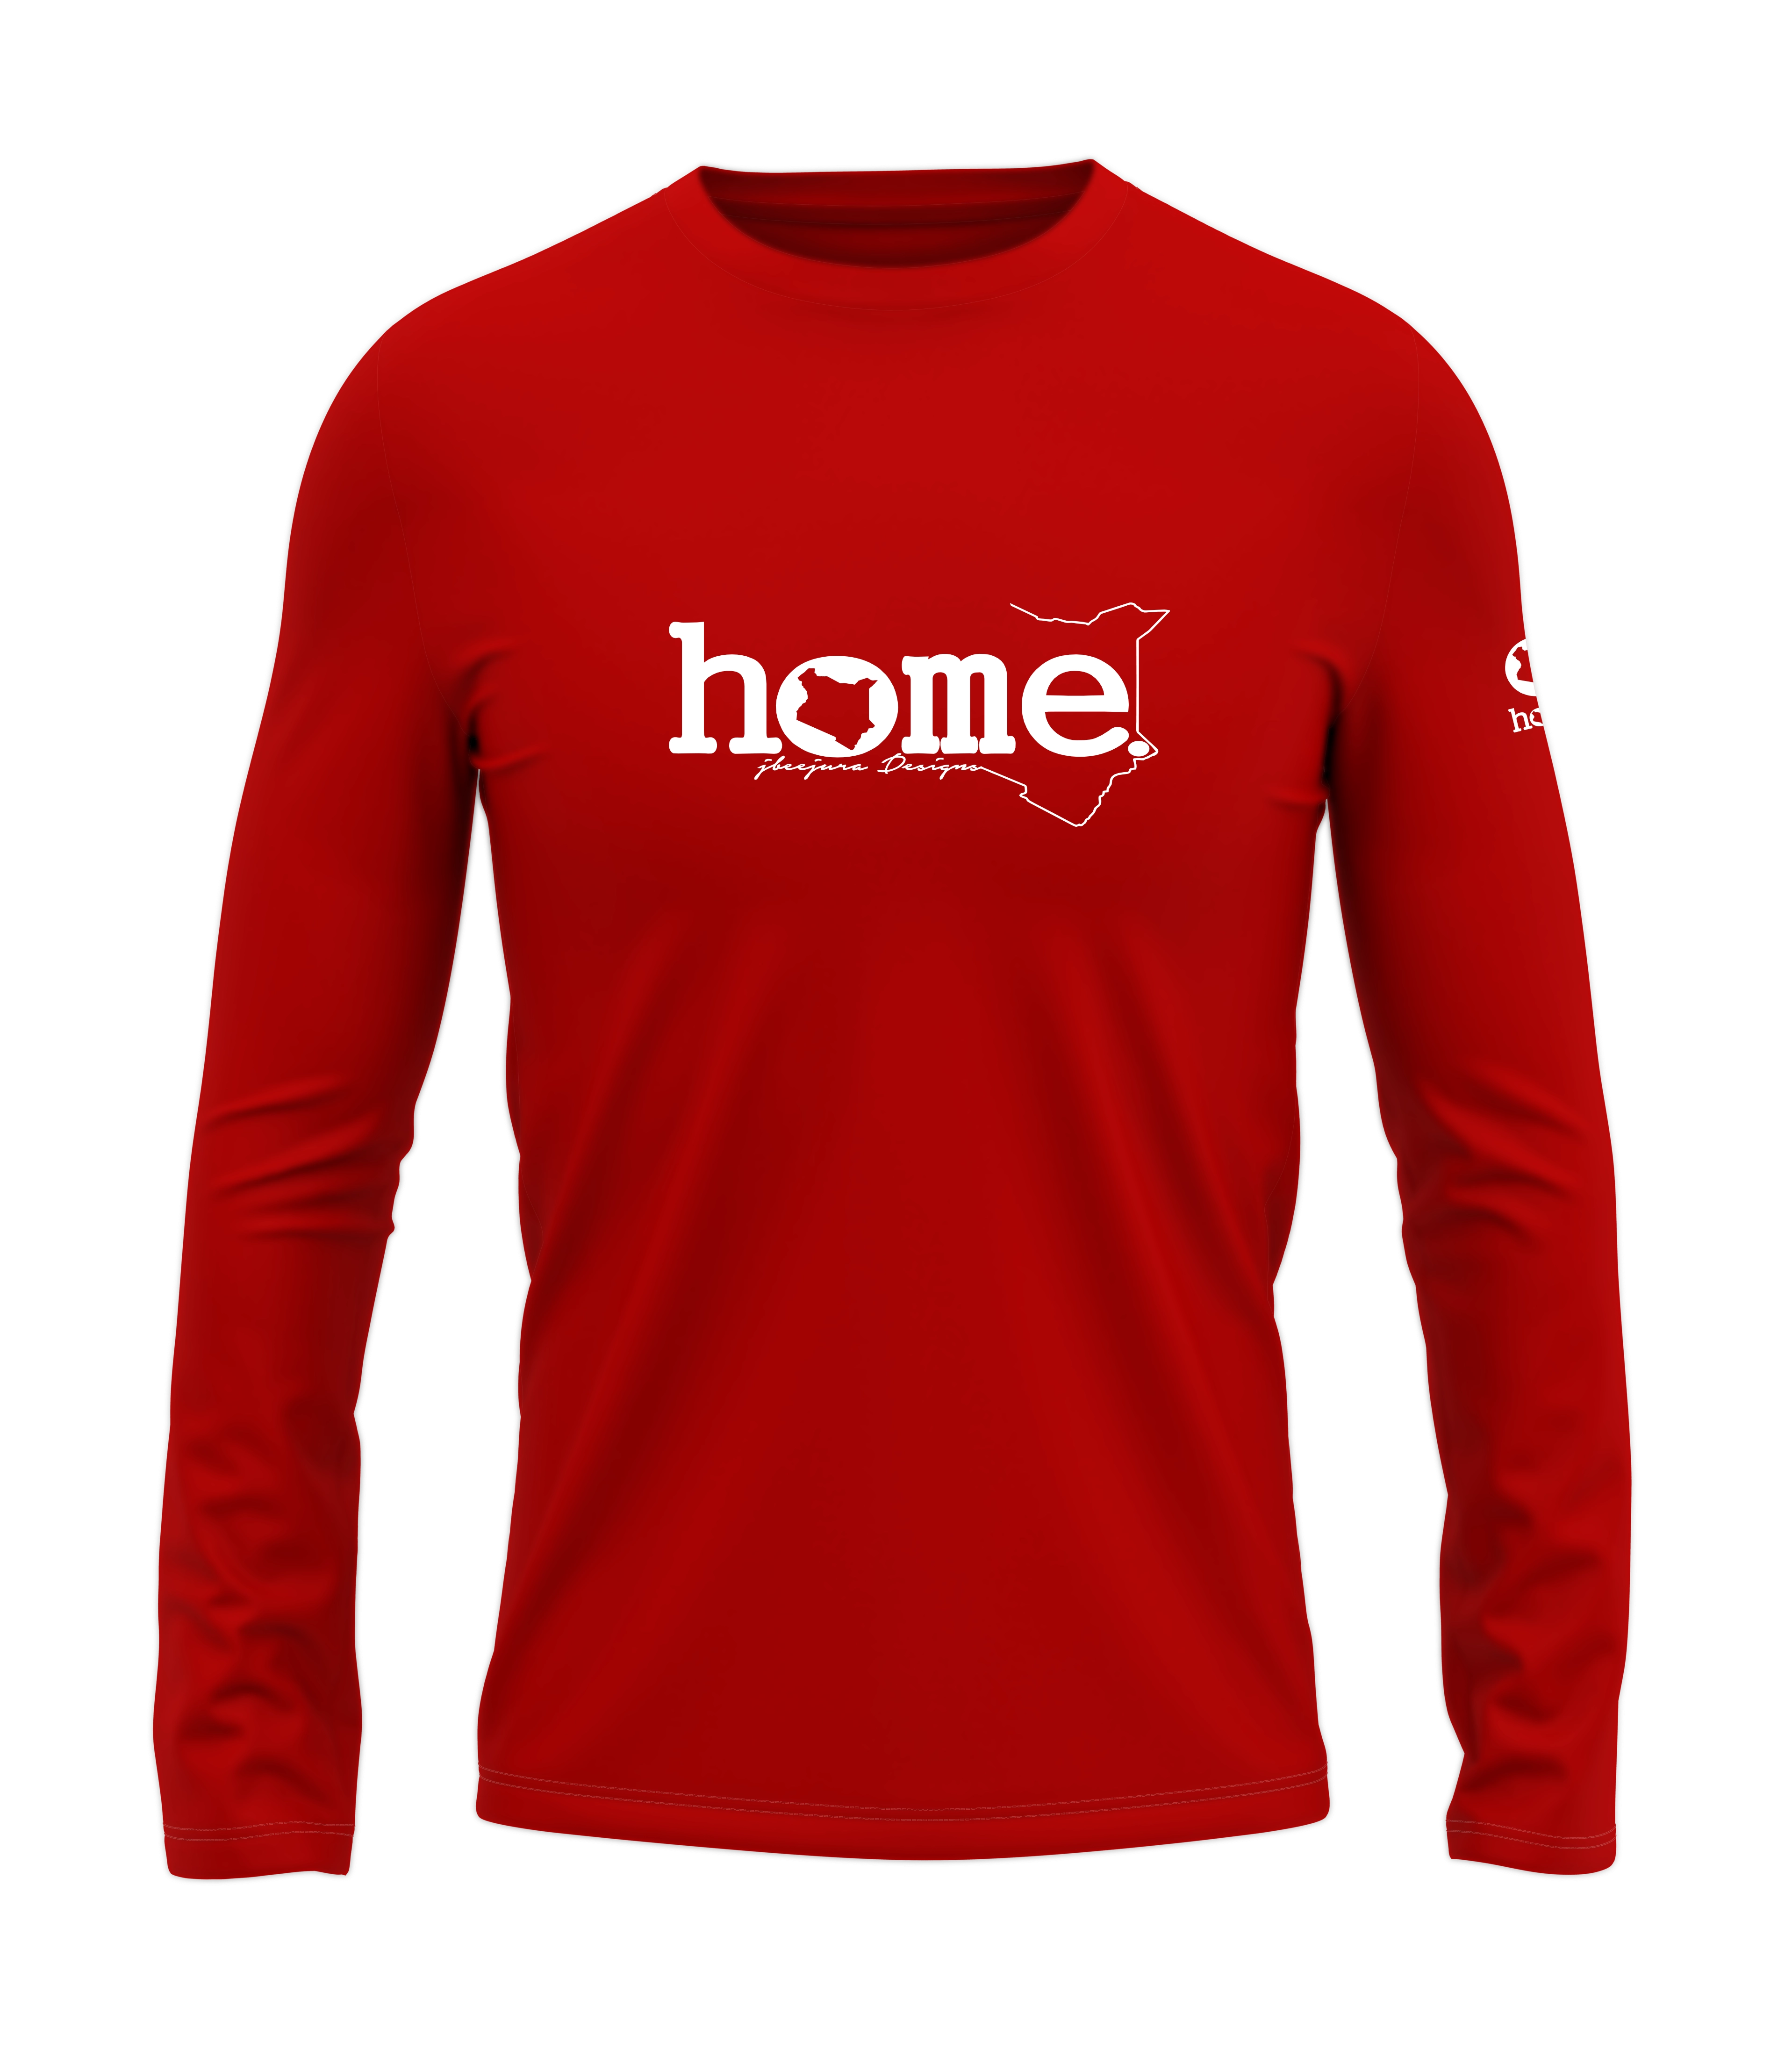 home_254 LONG-SLEEVED RED T-SHIRT WITH A WHITE CLASSIC WORDS PRINT – COTTON PLUS FABRIC